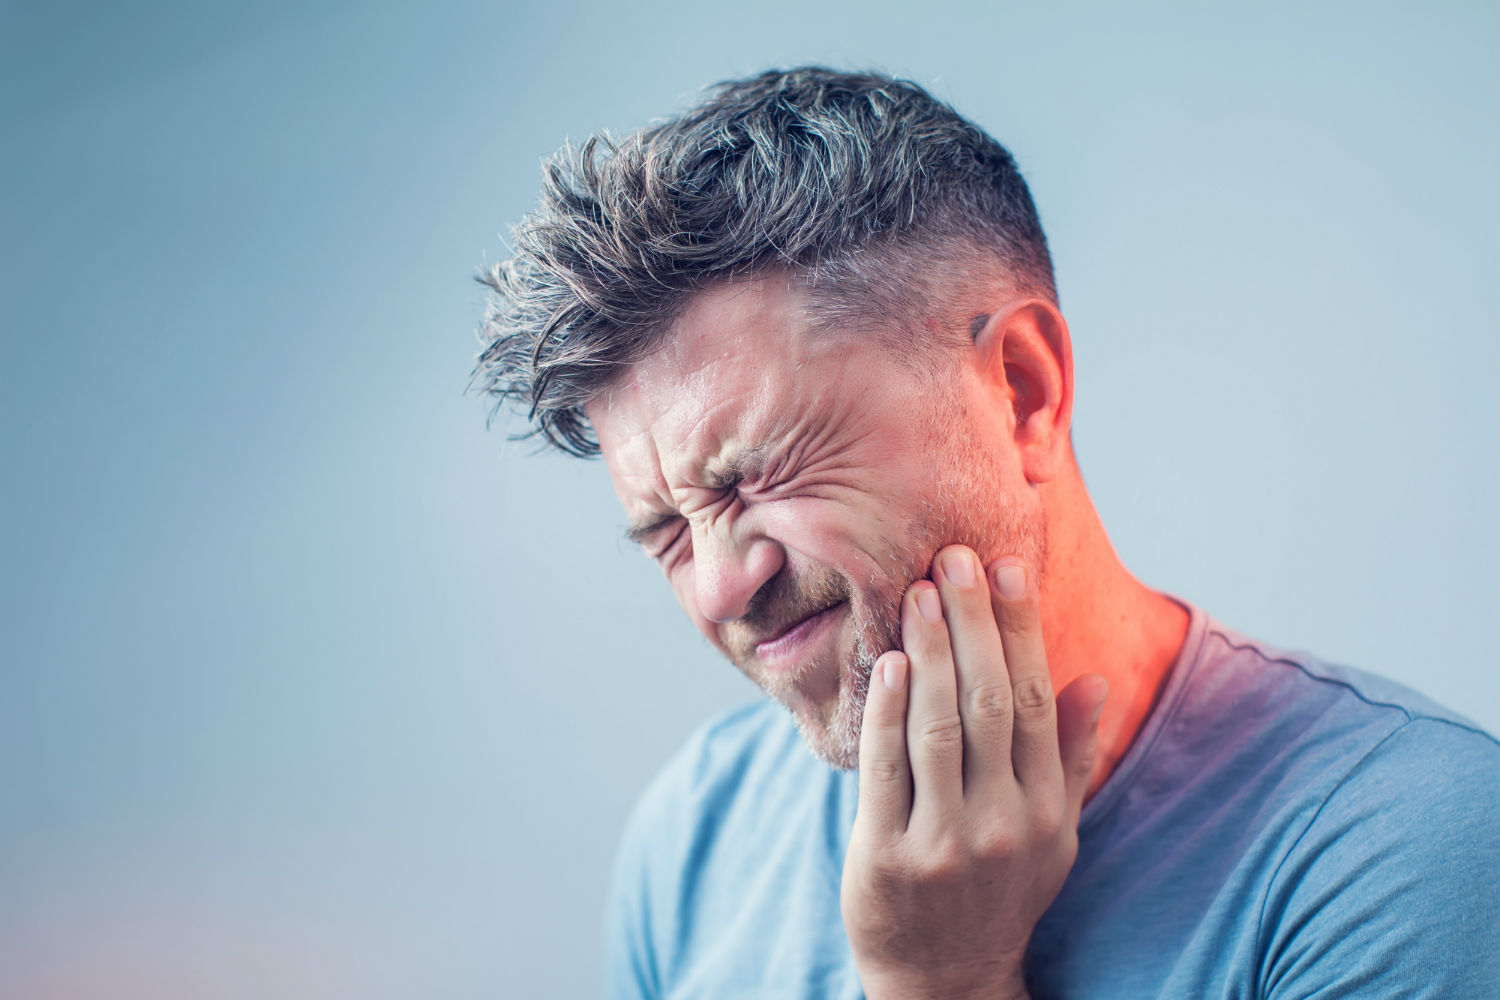 Tooth aches can be cause for a dental emergency.